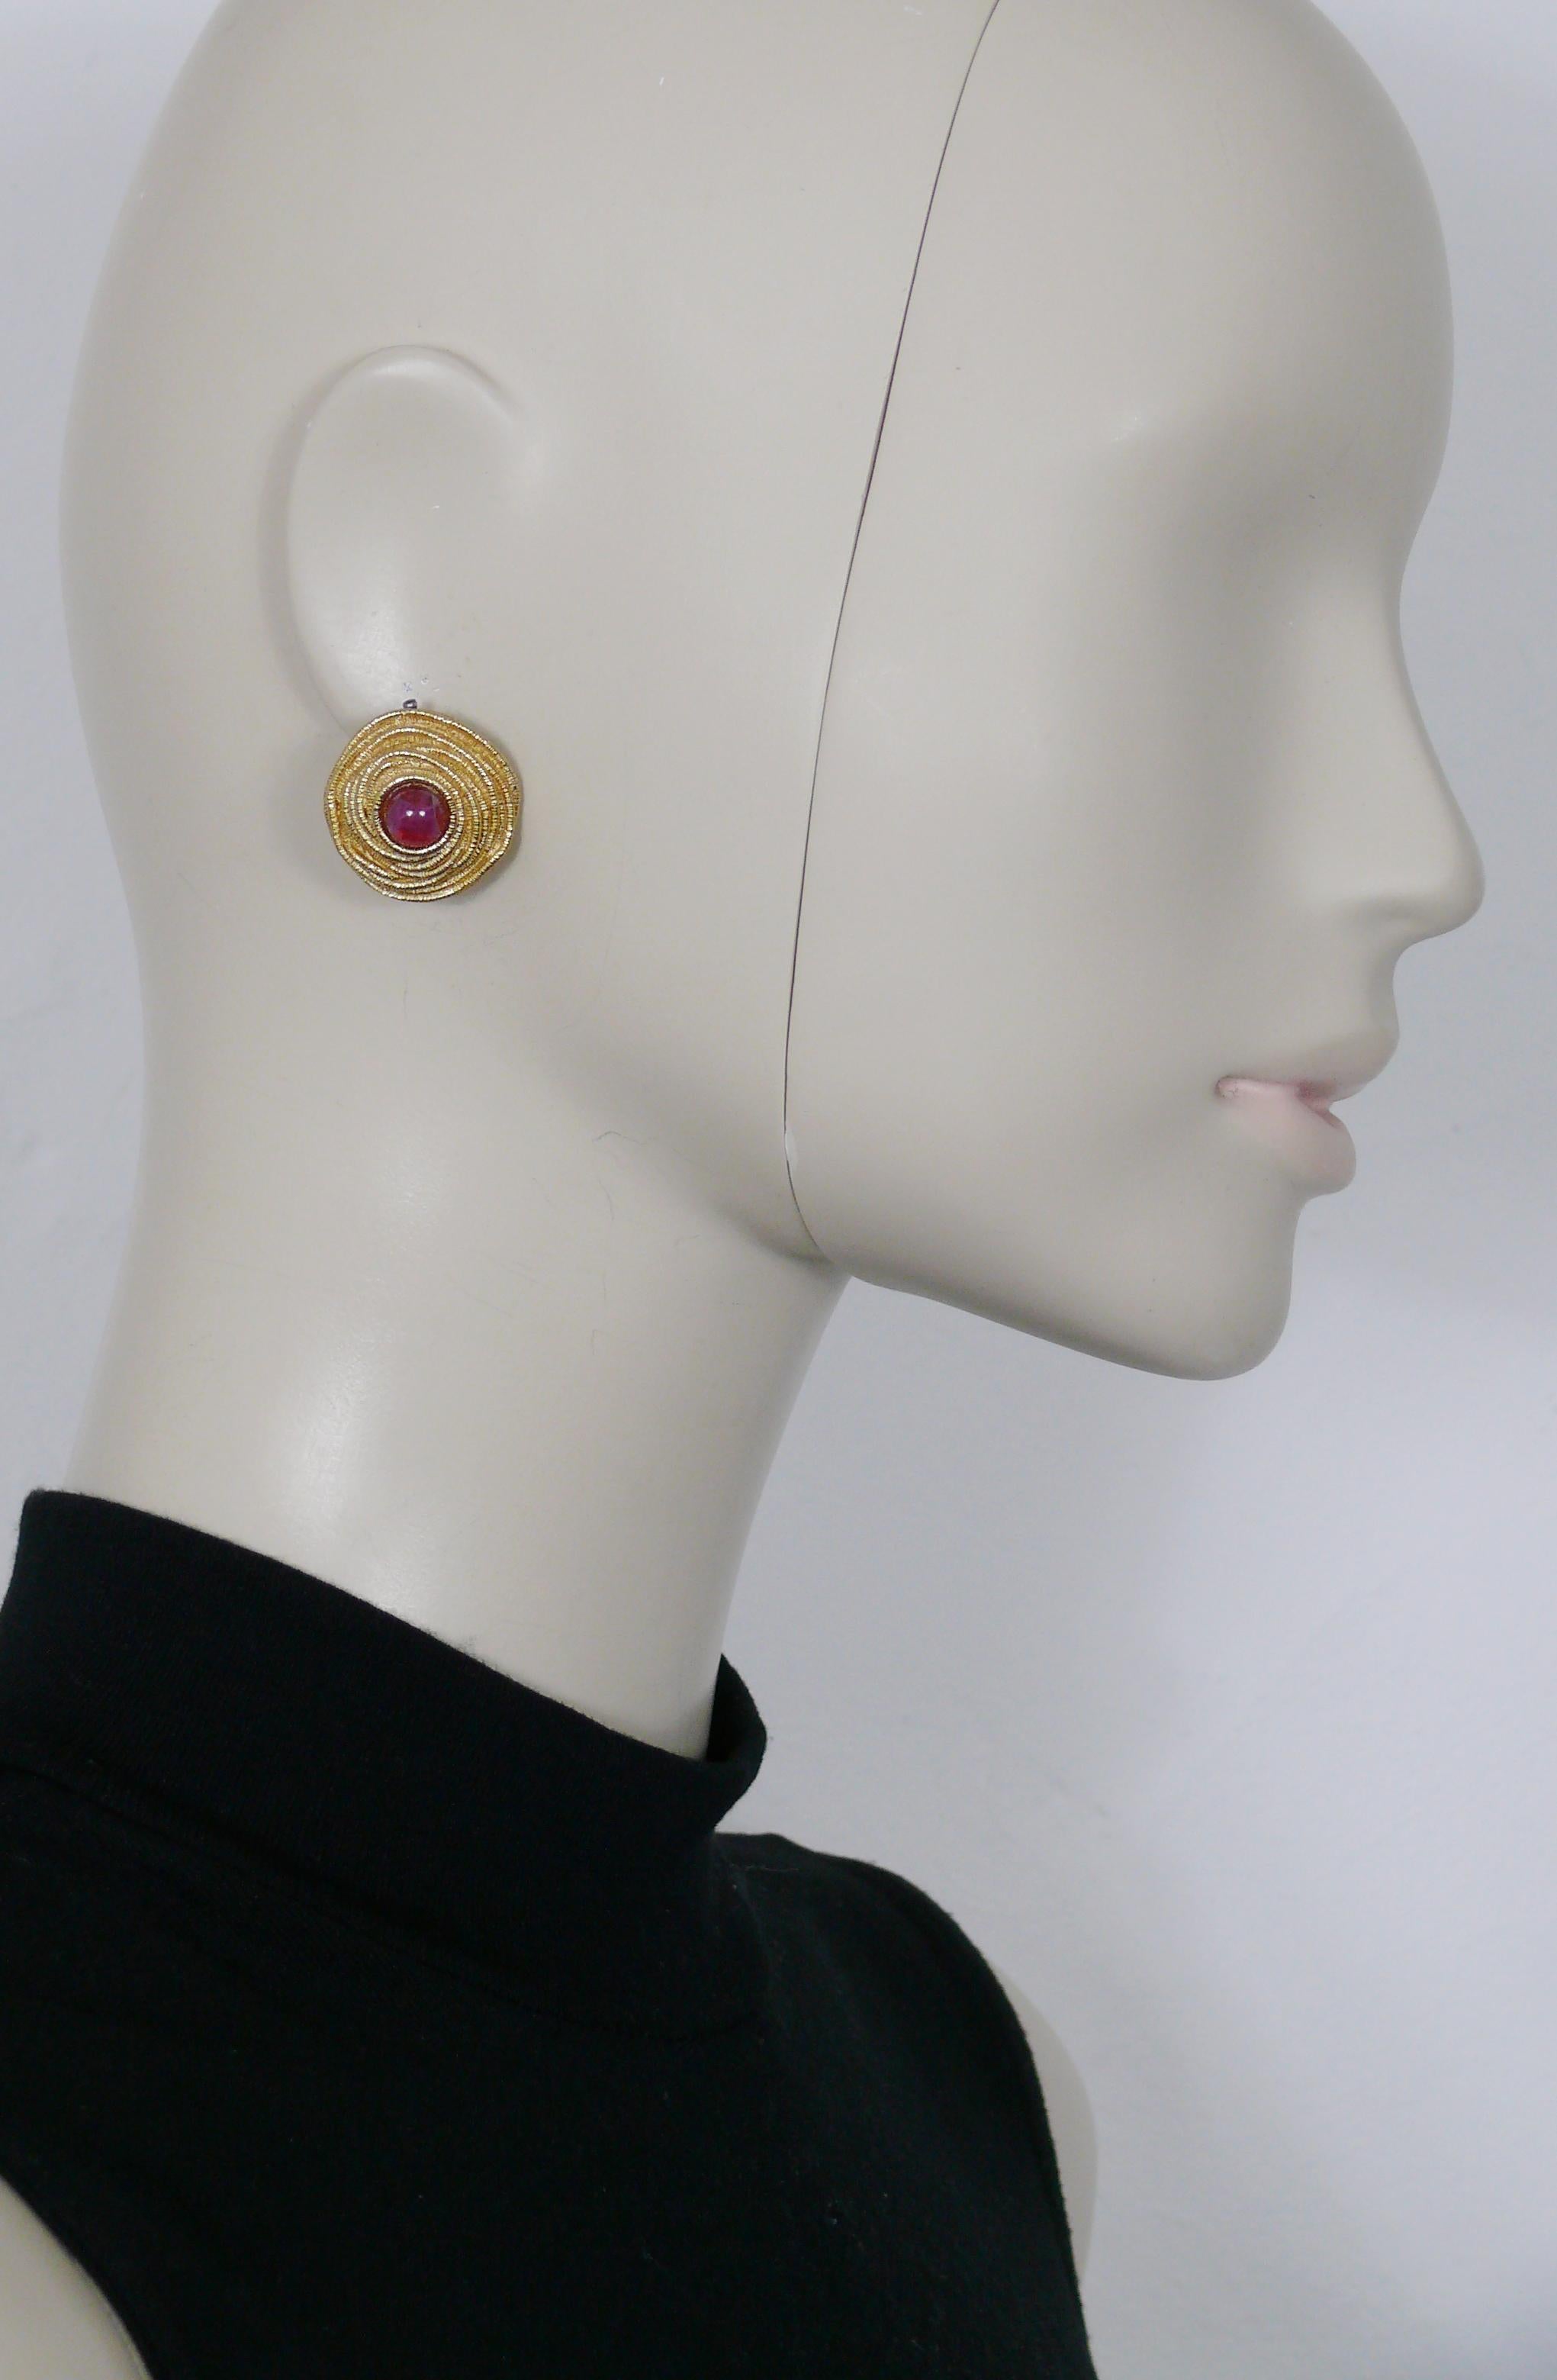 CHRISTIAN DIOR vintage gold toned nest-shaped clip-on earrings embelisshed with a marbled red glass cabochons.

Embossed CHR. DIOR © GERMANY.

Indicative measurements : diameter approx. 2.4 cm (0.94 inch).

Weight per earrings : approx. 8